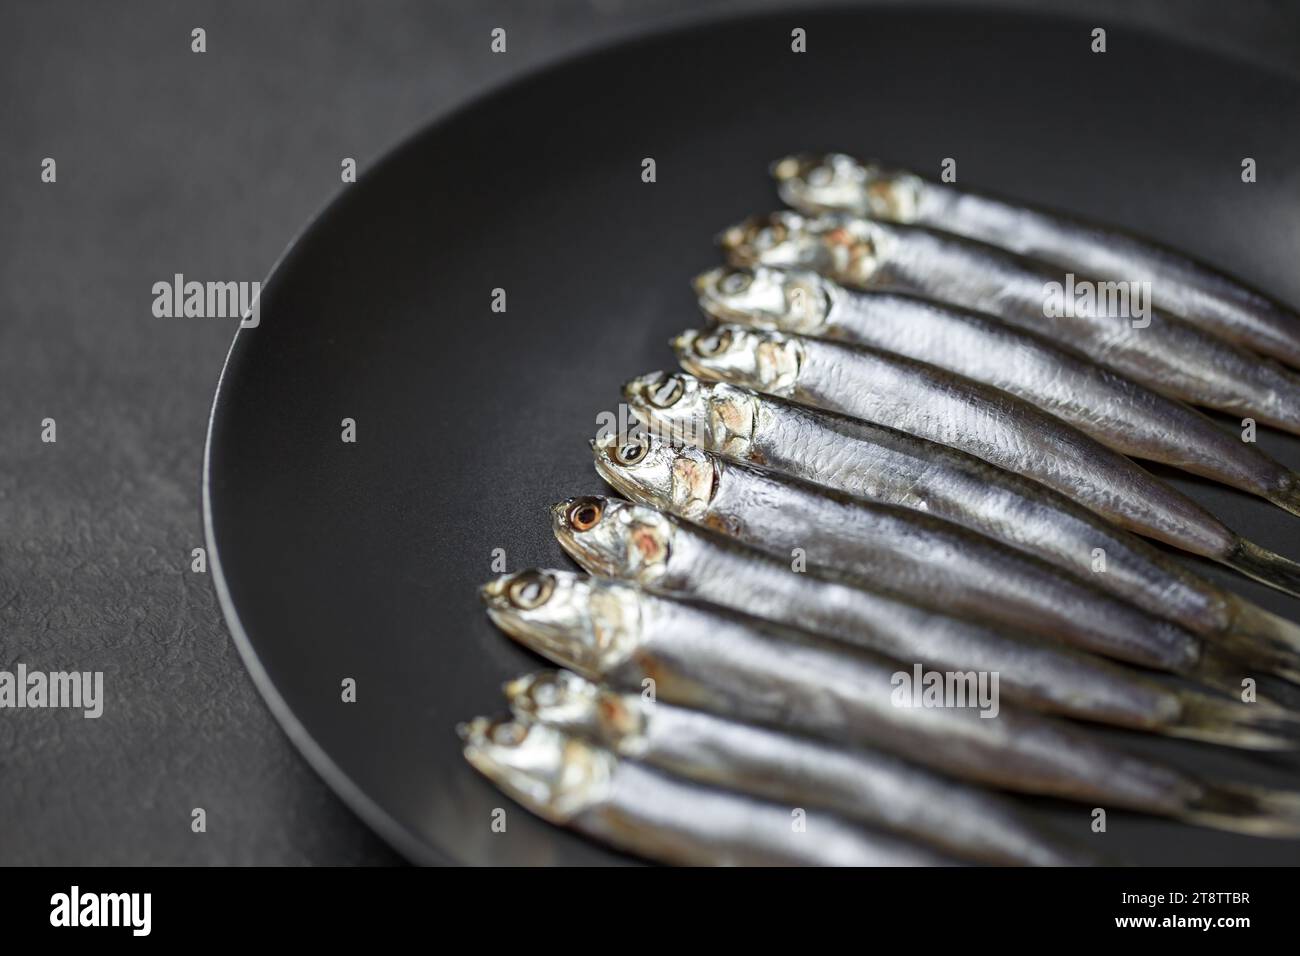 Anchovy european, hamsa fresh, source of omega 3, several small fish laid on gray plate, on dark background, selective focus. Stock Photo